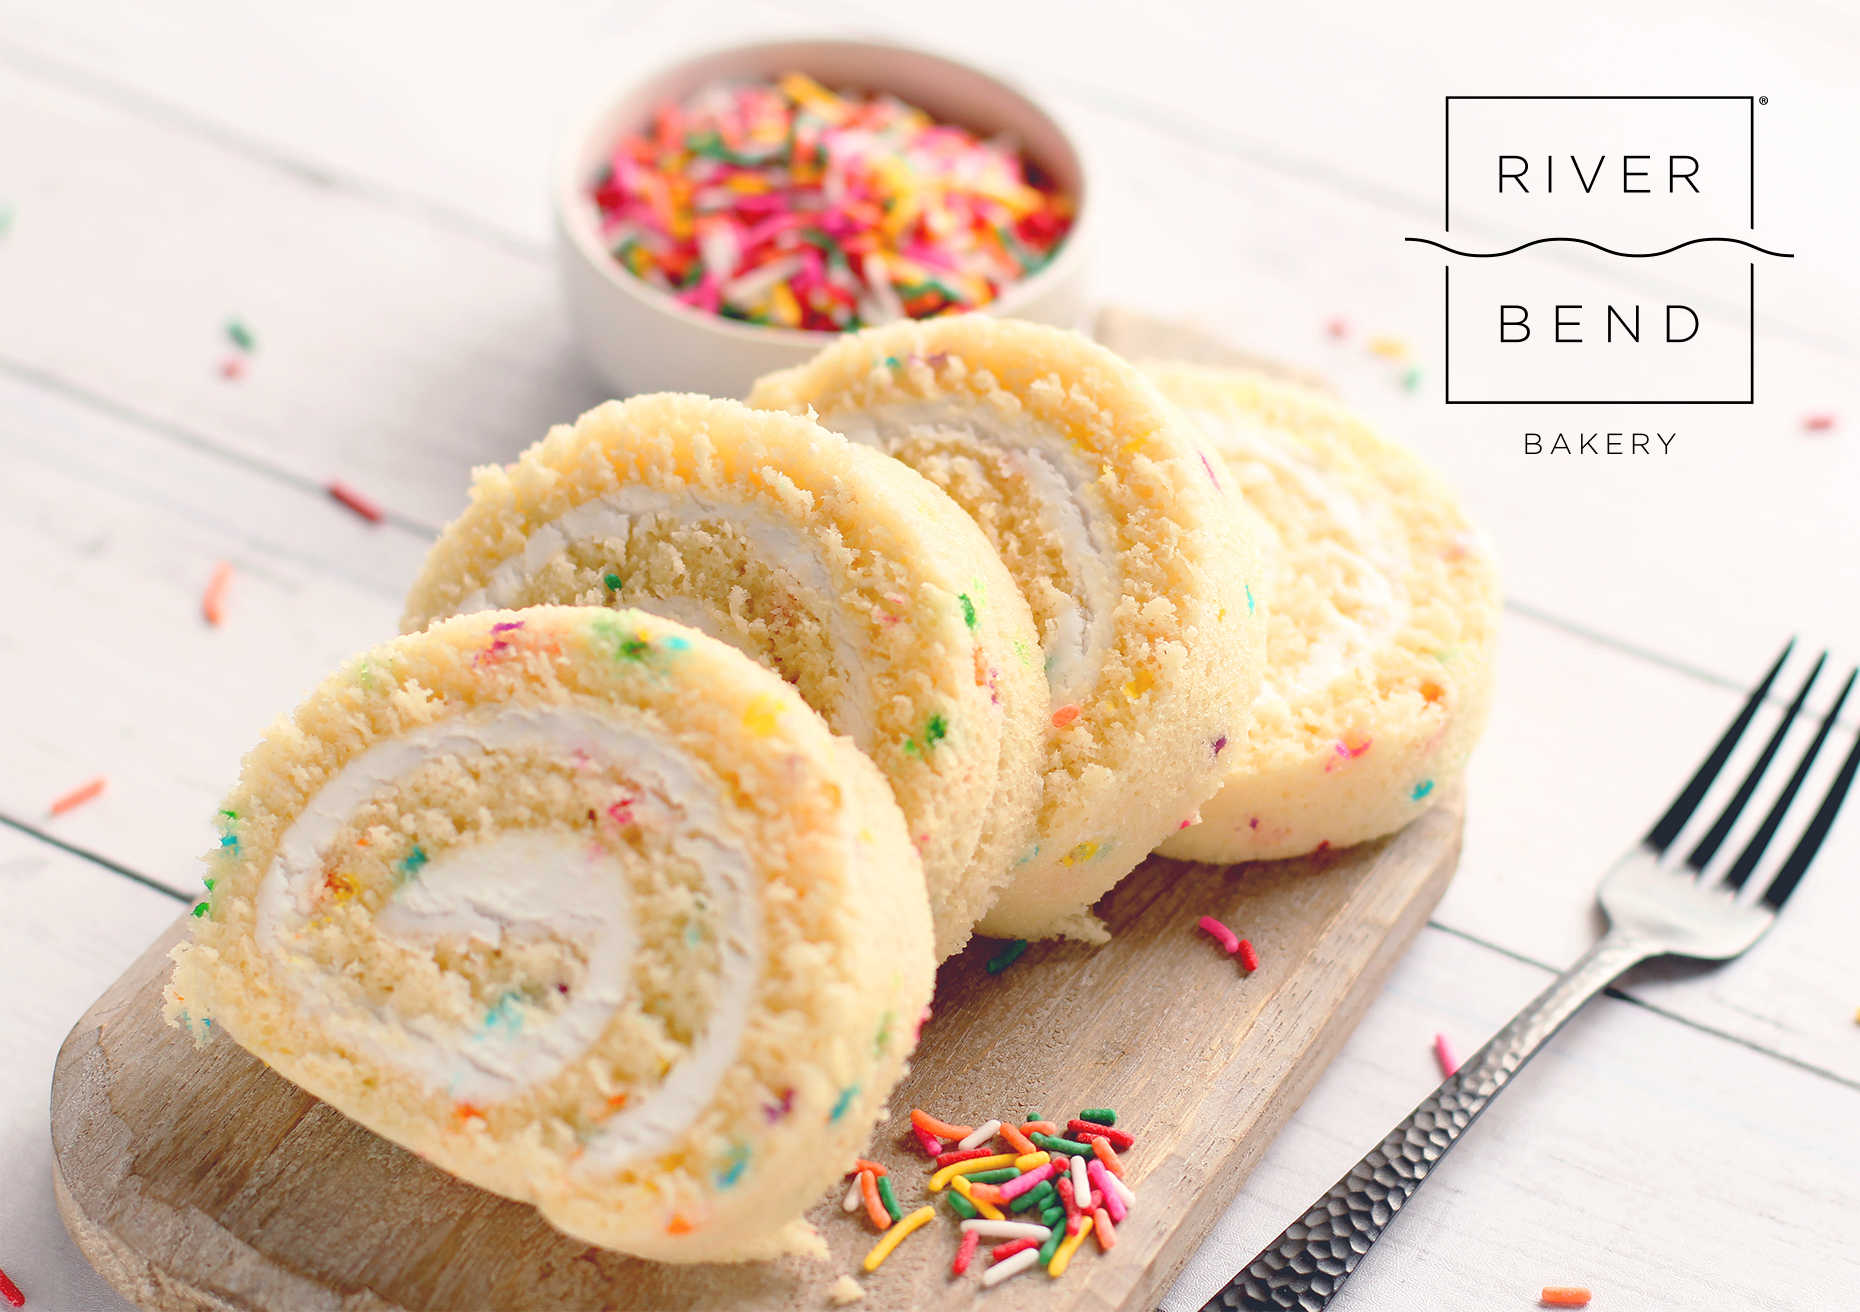 River Bend Bakery Products